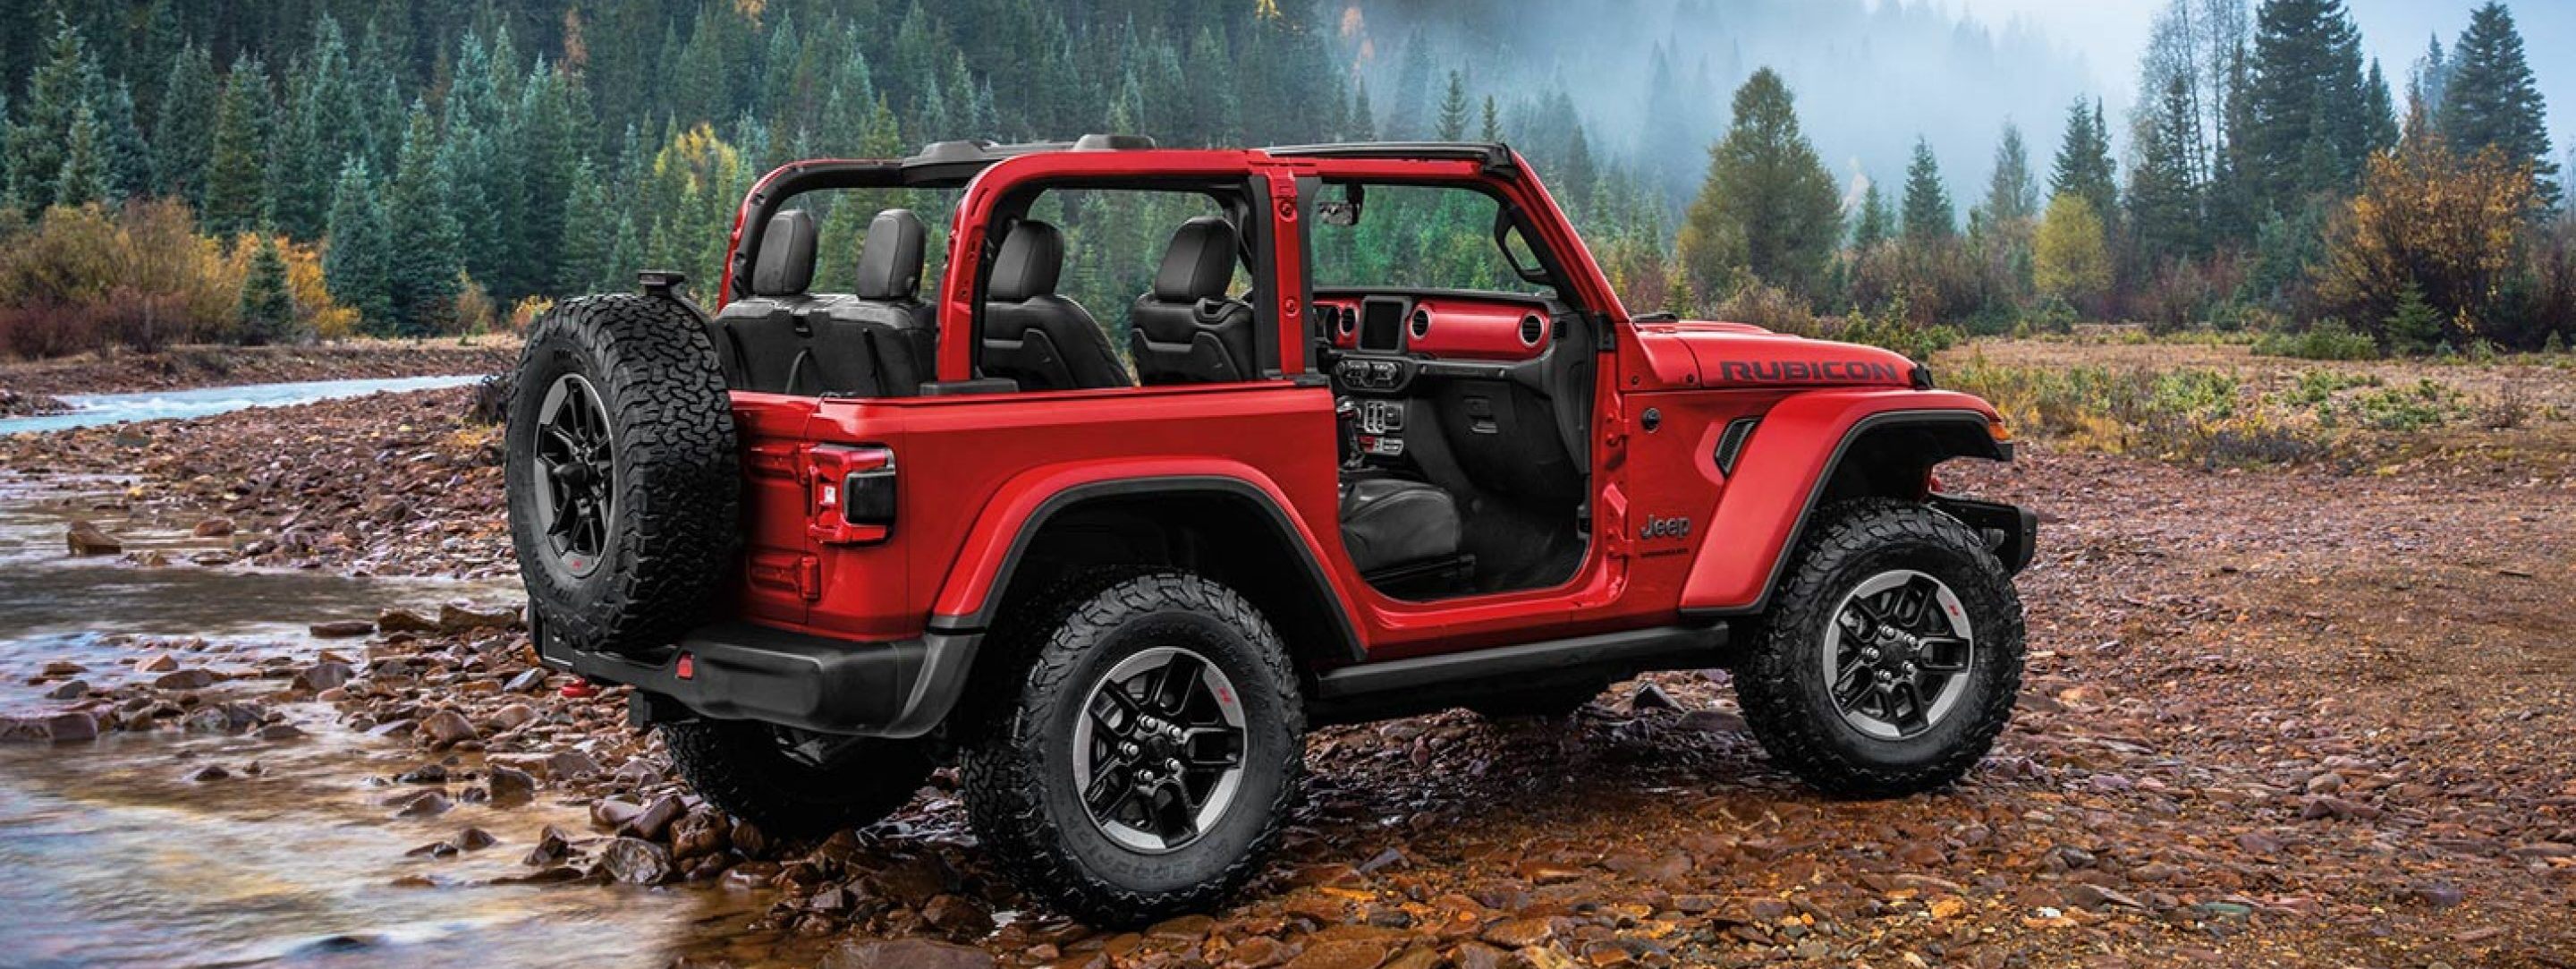 2020 Jeep Wrangler for Sale near St. Louis, MO